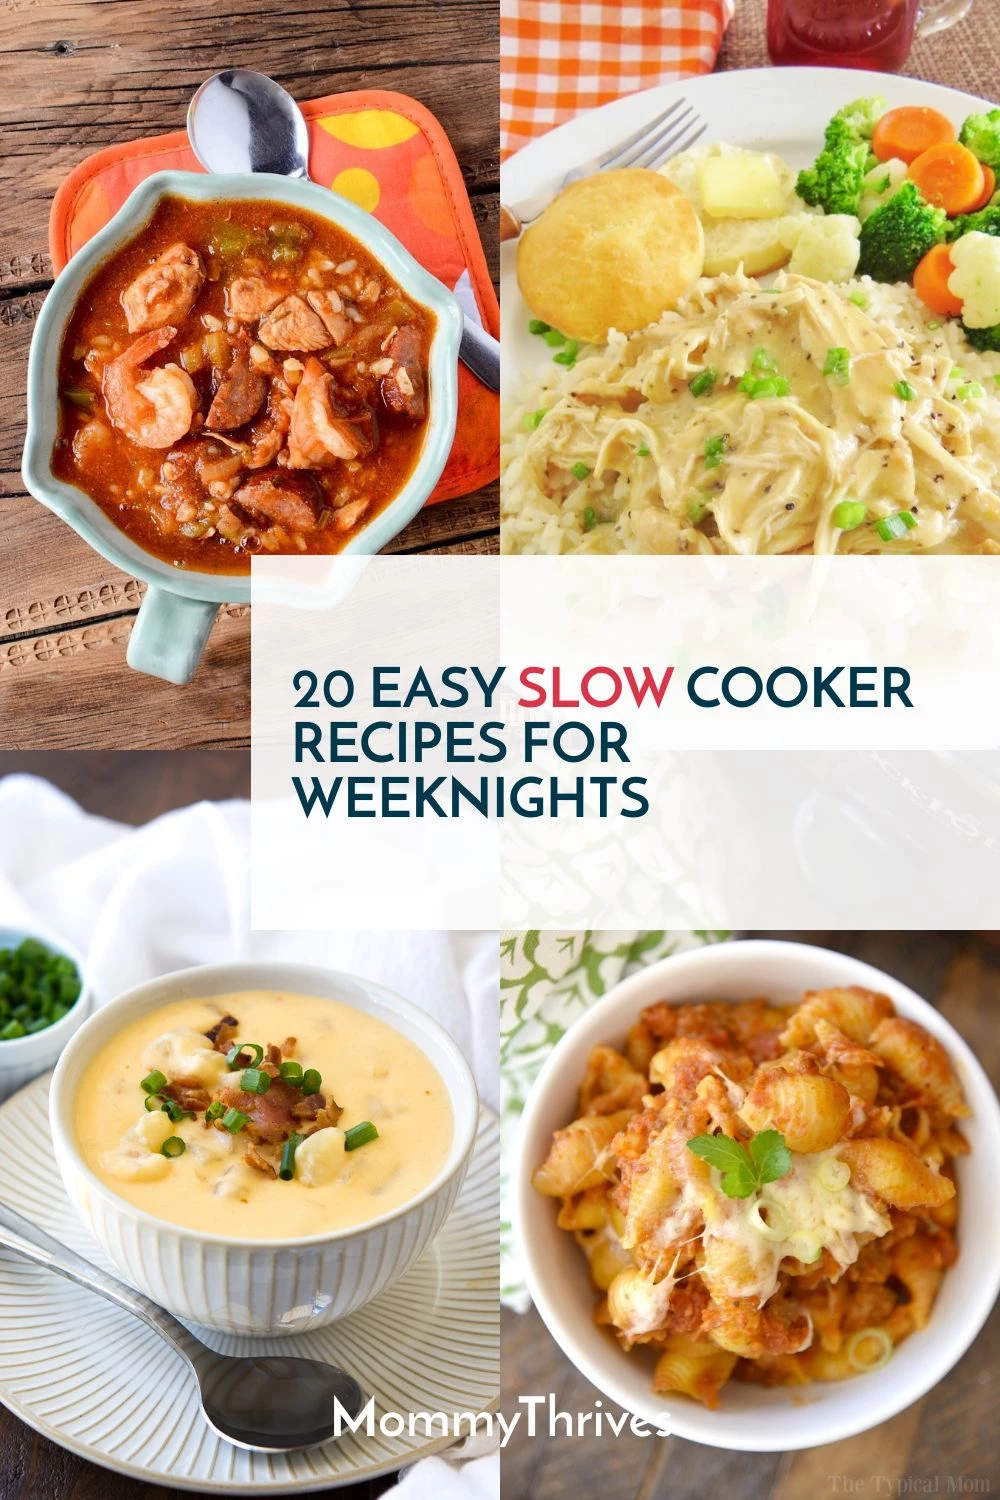 https://www.mommythrives.com/wp-content/uploads/2019/10/Crock-Pot-Meals-For-Busy-Moms-Slow-Cooker-Dinner-Recipes-To-Try-Easy-Weeknight-Slow-Cooker-Dinners.webp